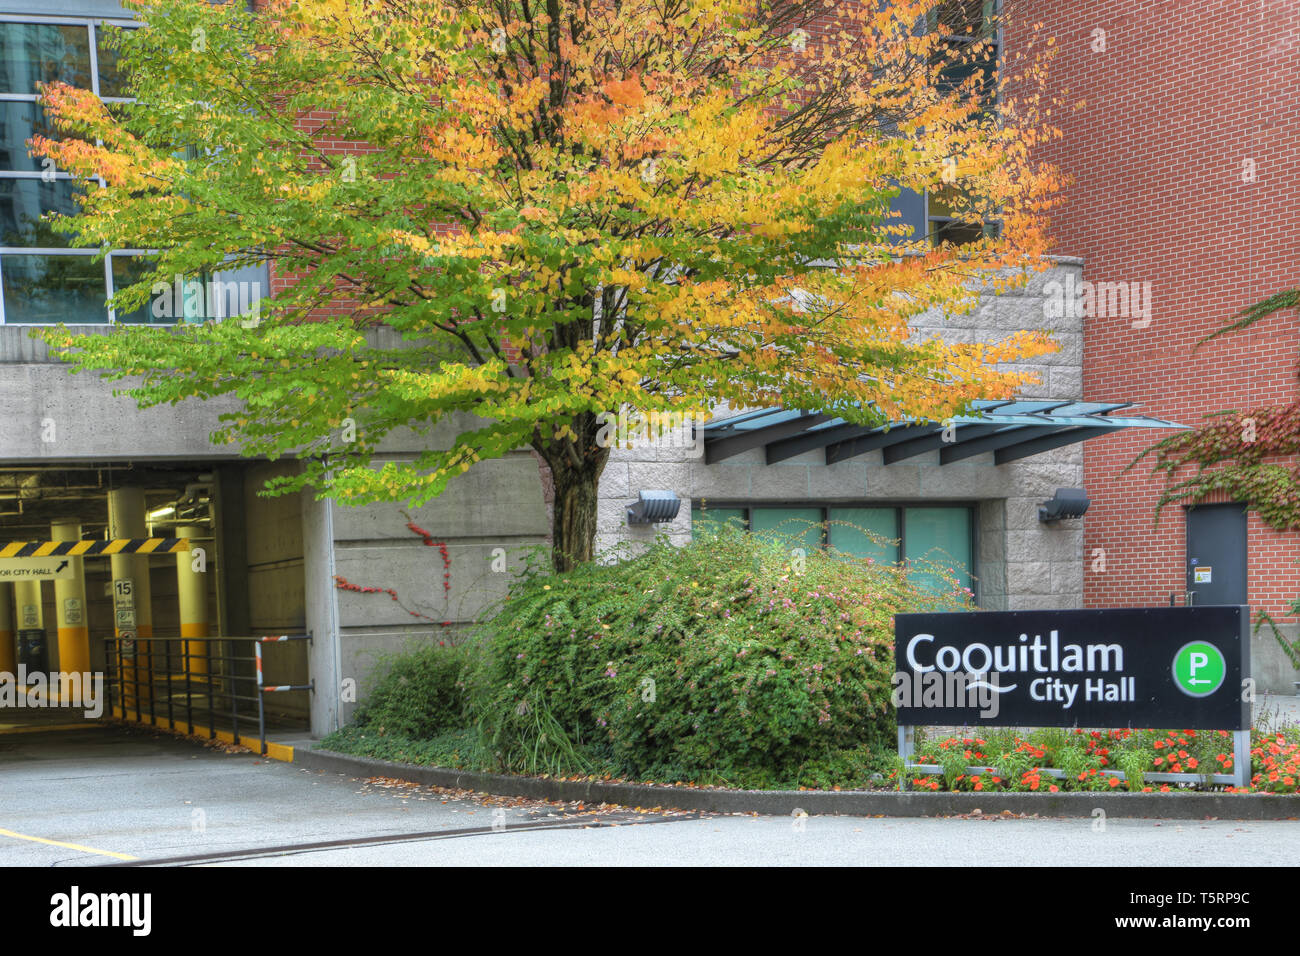 A View of Coquitlam, British Columbia City Hall Stock Photo